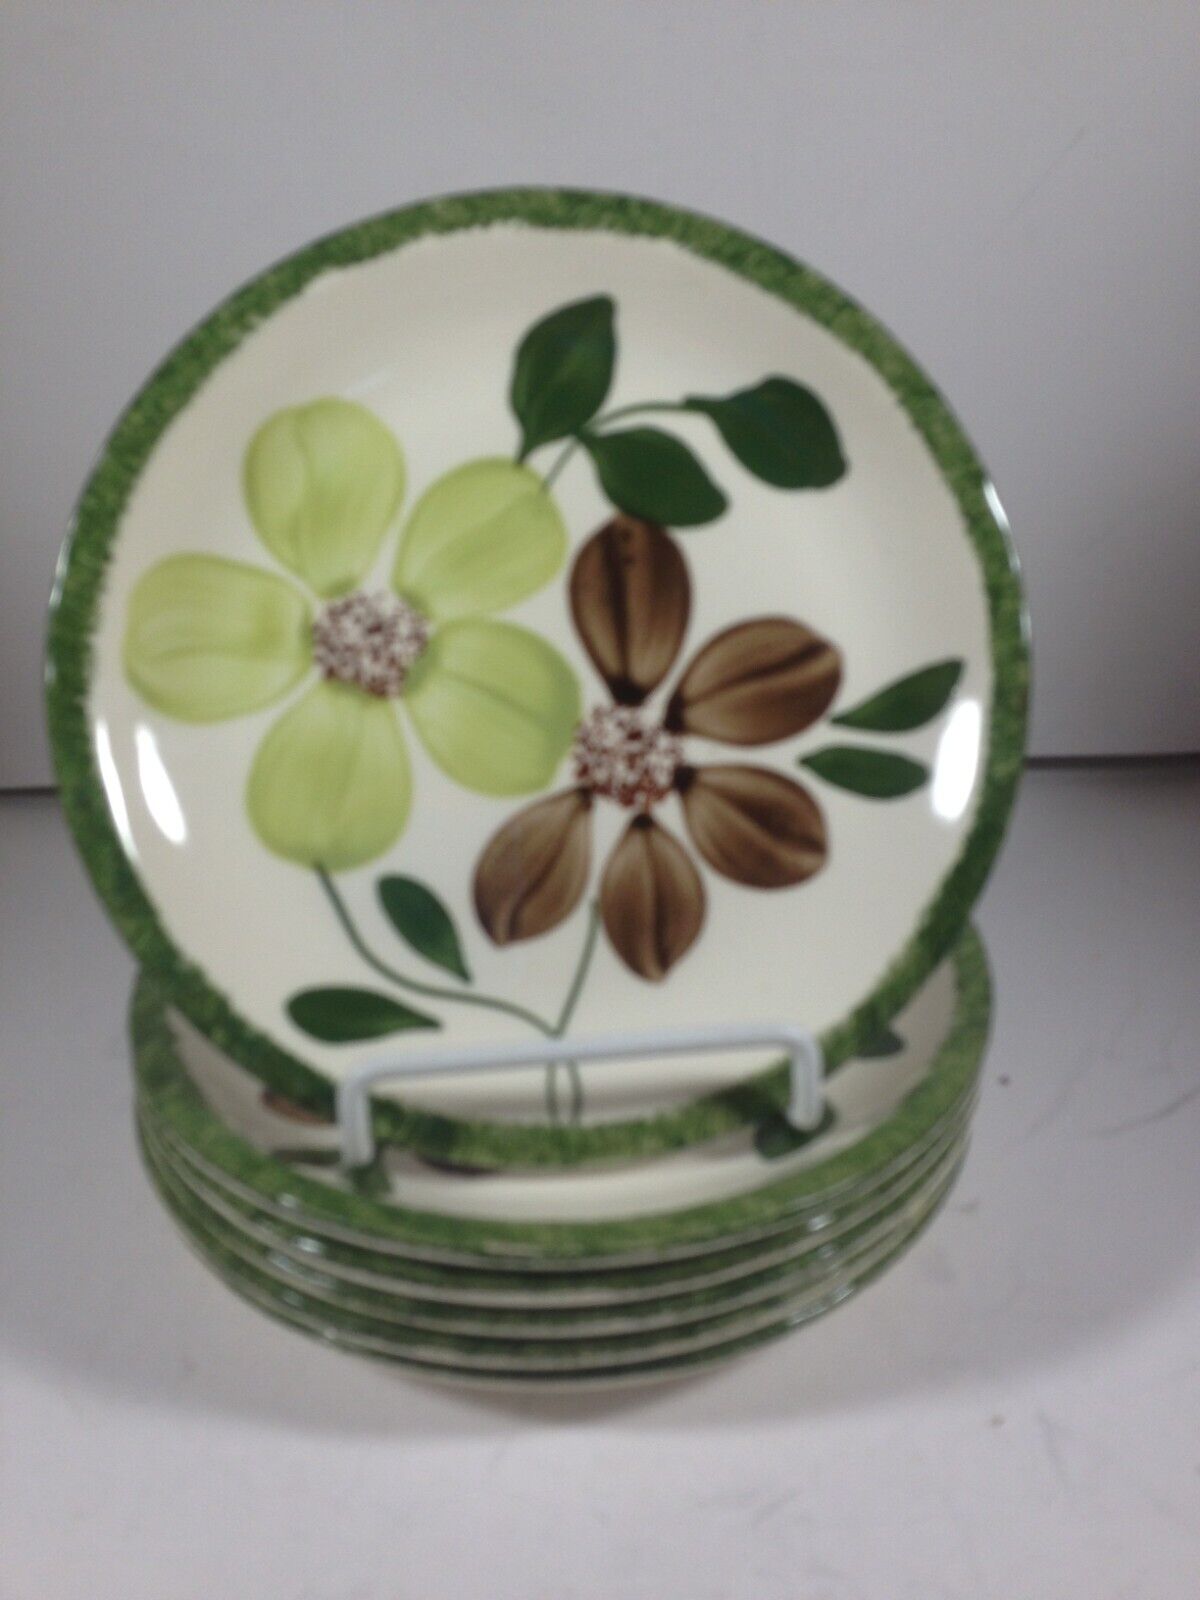 Southern Potteries Blue Ridge GREEN BRIAR 6-1/4” Bread Butter Plate Set of 6